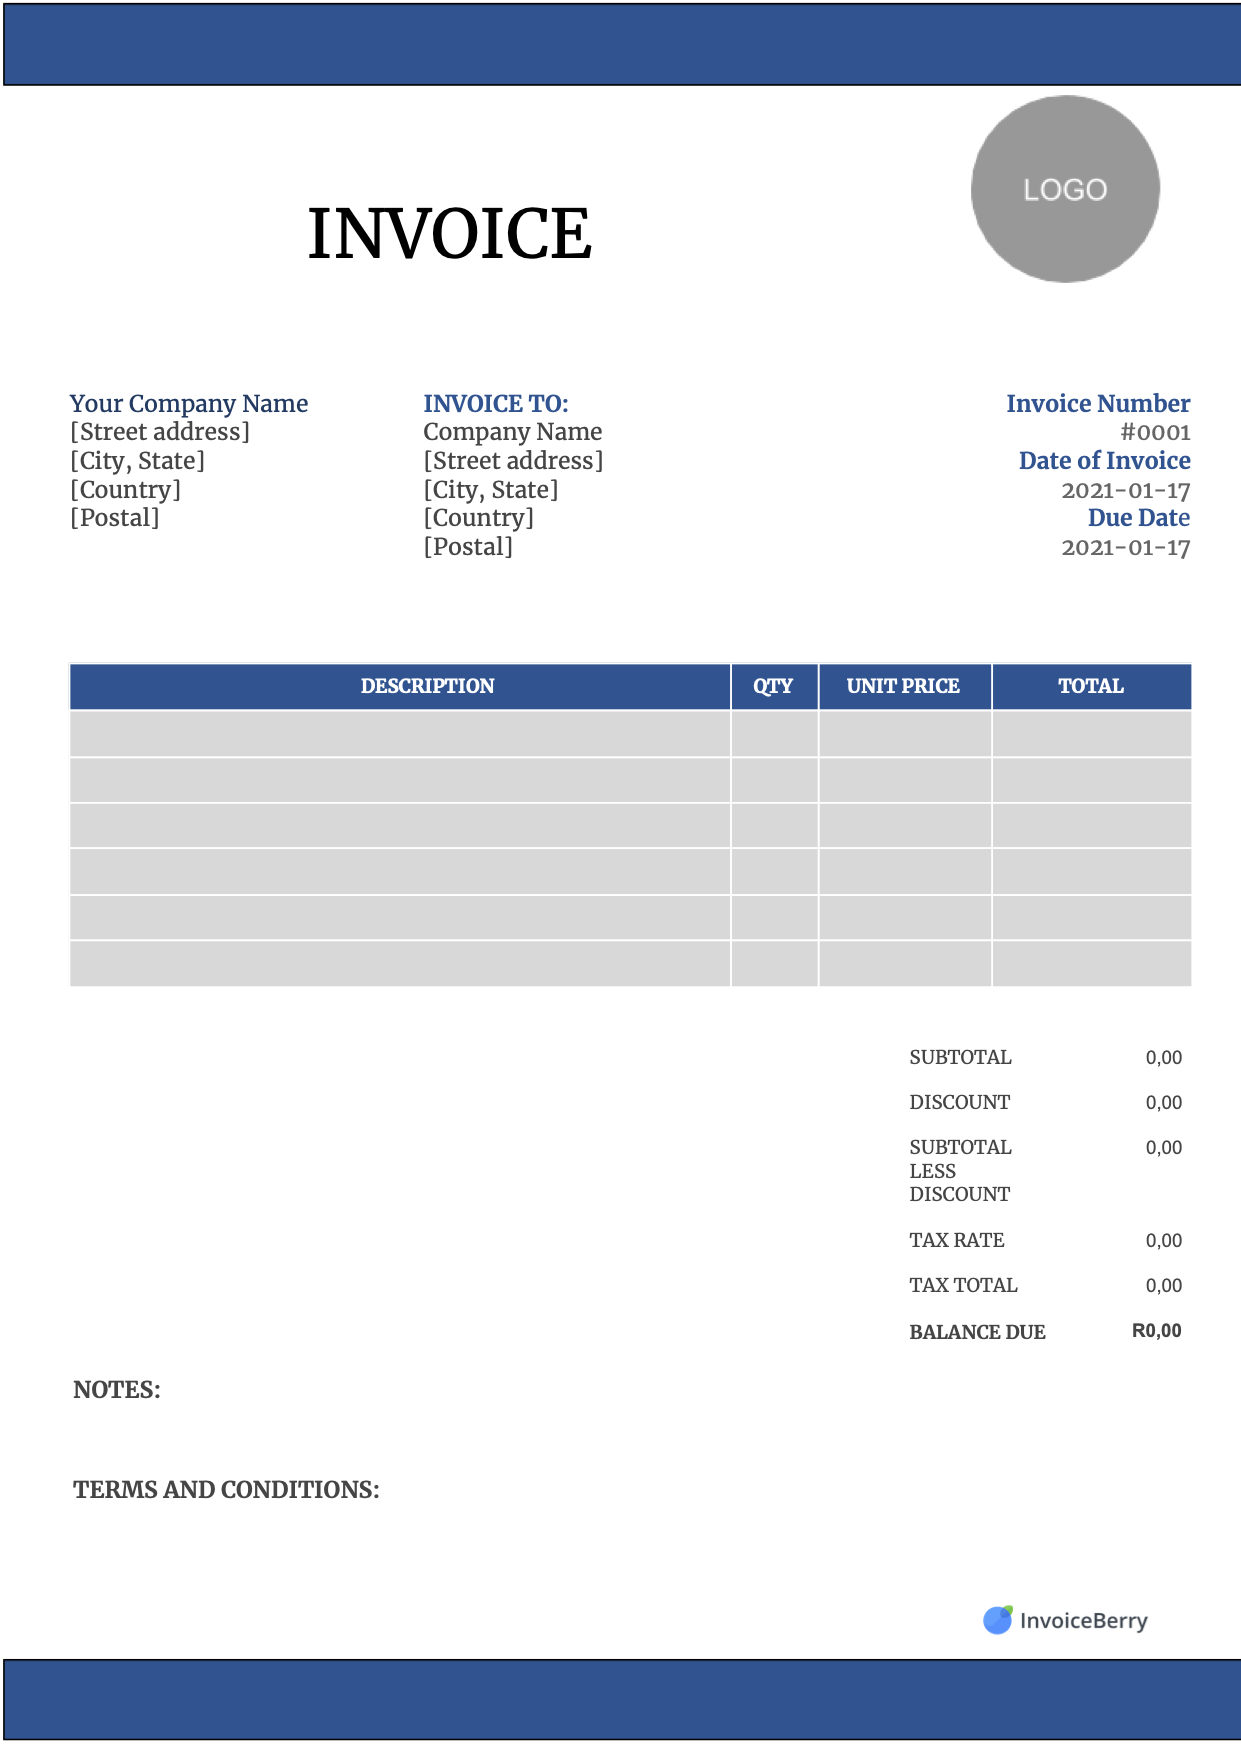 Free Invoice Templates Download All Formats And Industries InvoiceBerry - Free Bill Invoice Template Printable